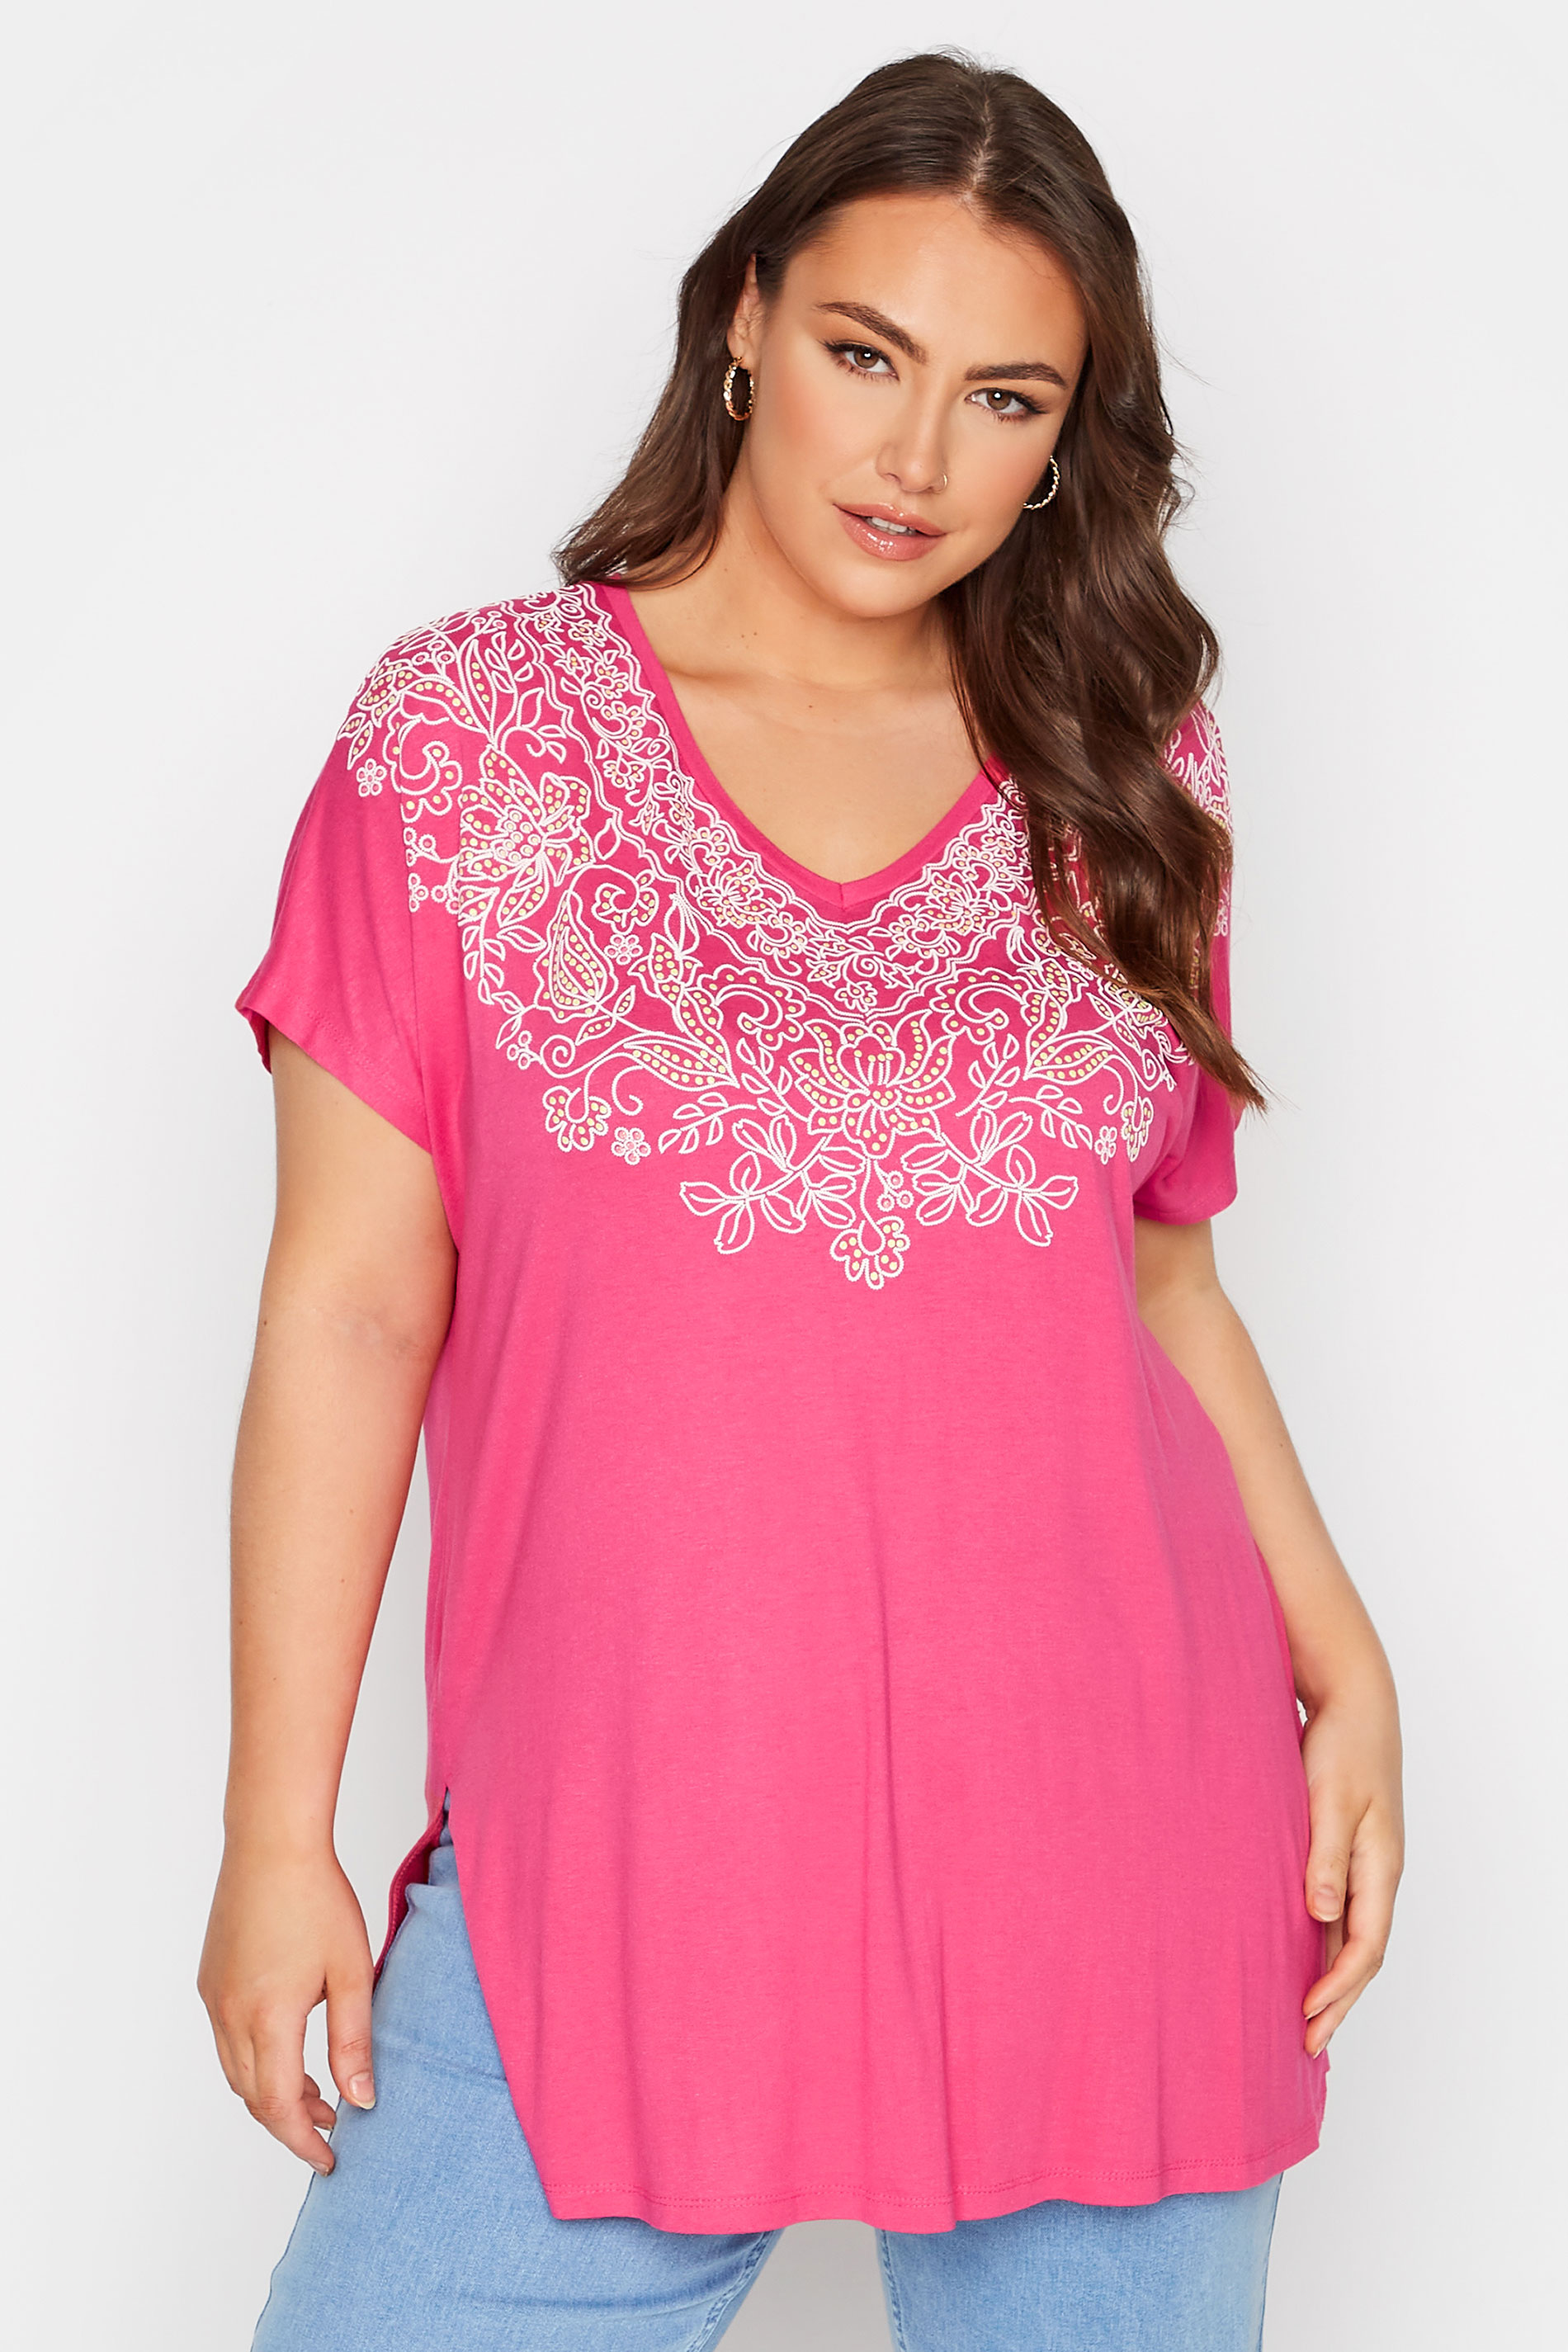 Grande taille  Tops Grande taille  Tops Jersey | Top Rose Manches Courtes Brodé Aztèque - DB23568